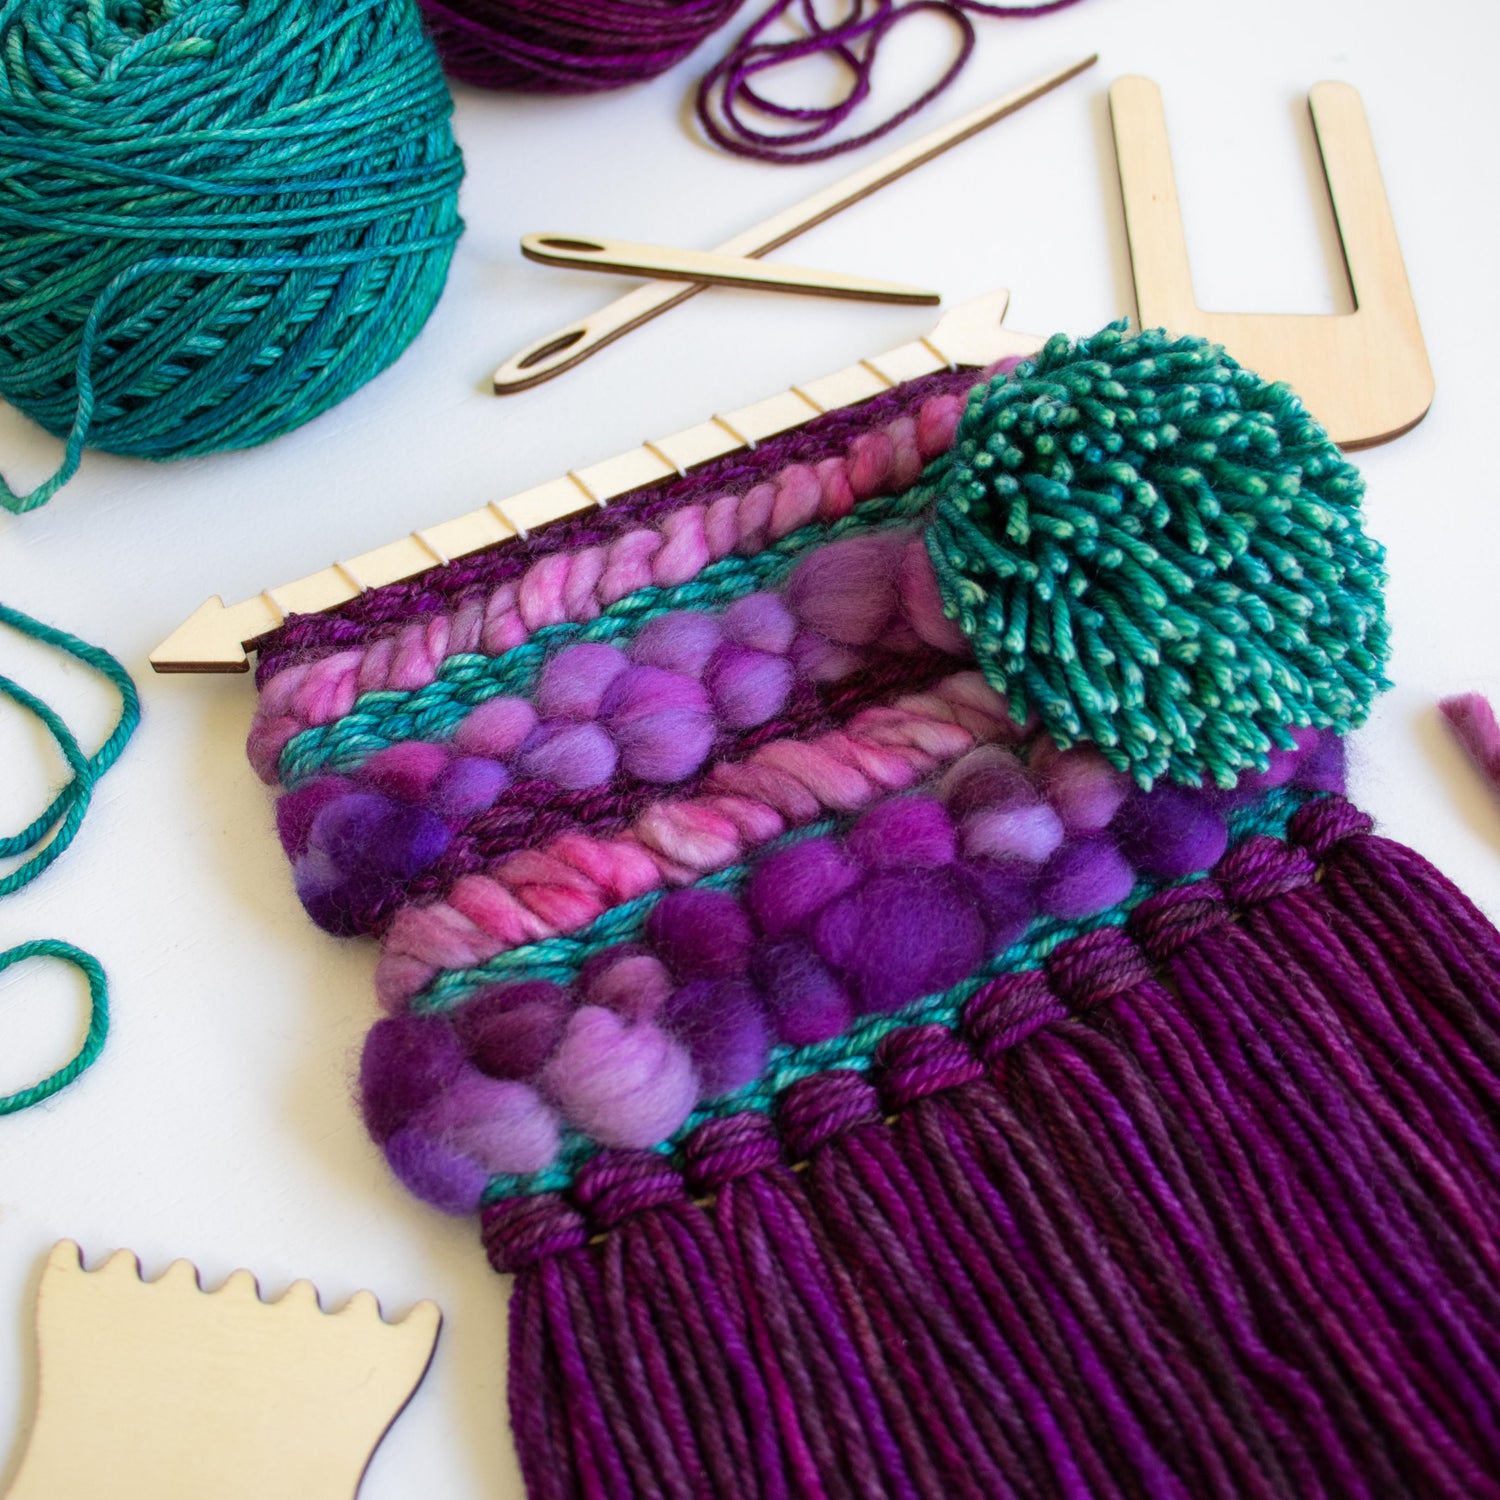 Make your own woven wall hanging using Bucilla's All-in-One-Loom Tool